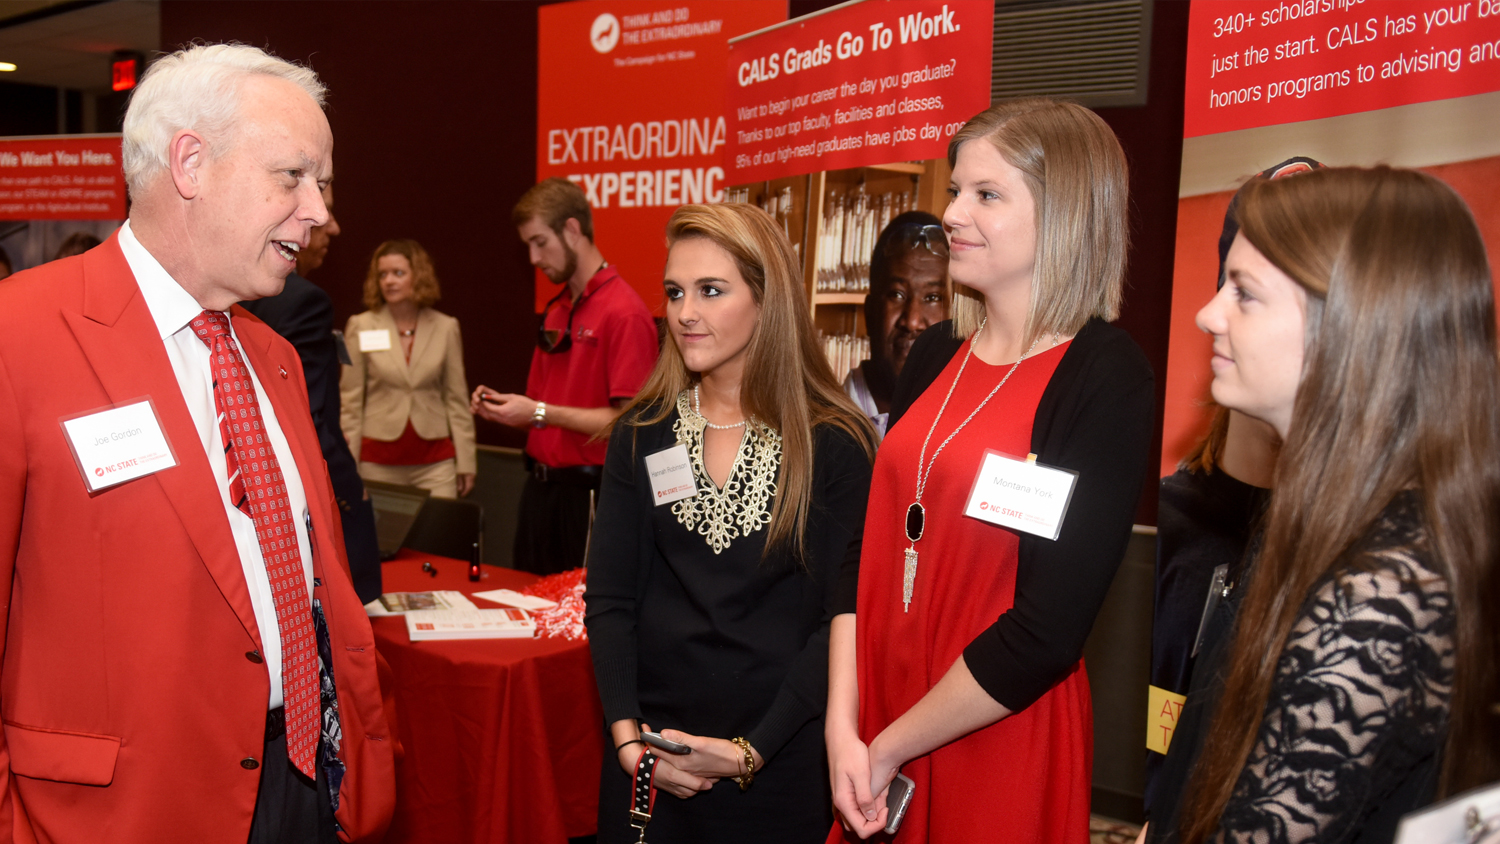 AGI students networking with NC&#160;State alums at event